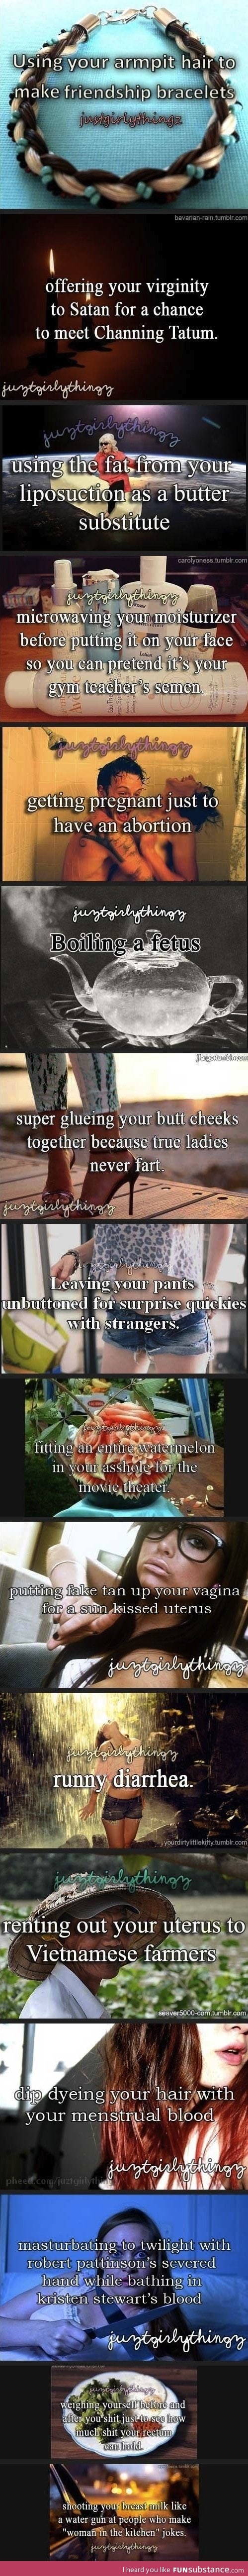 Some girly things